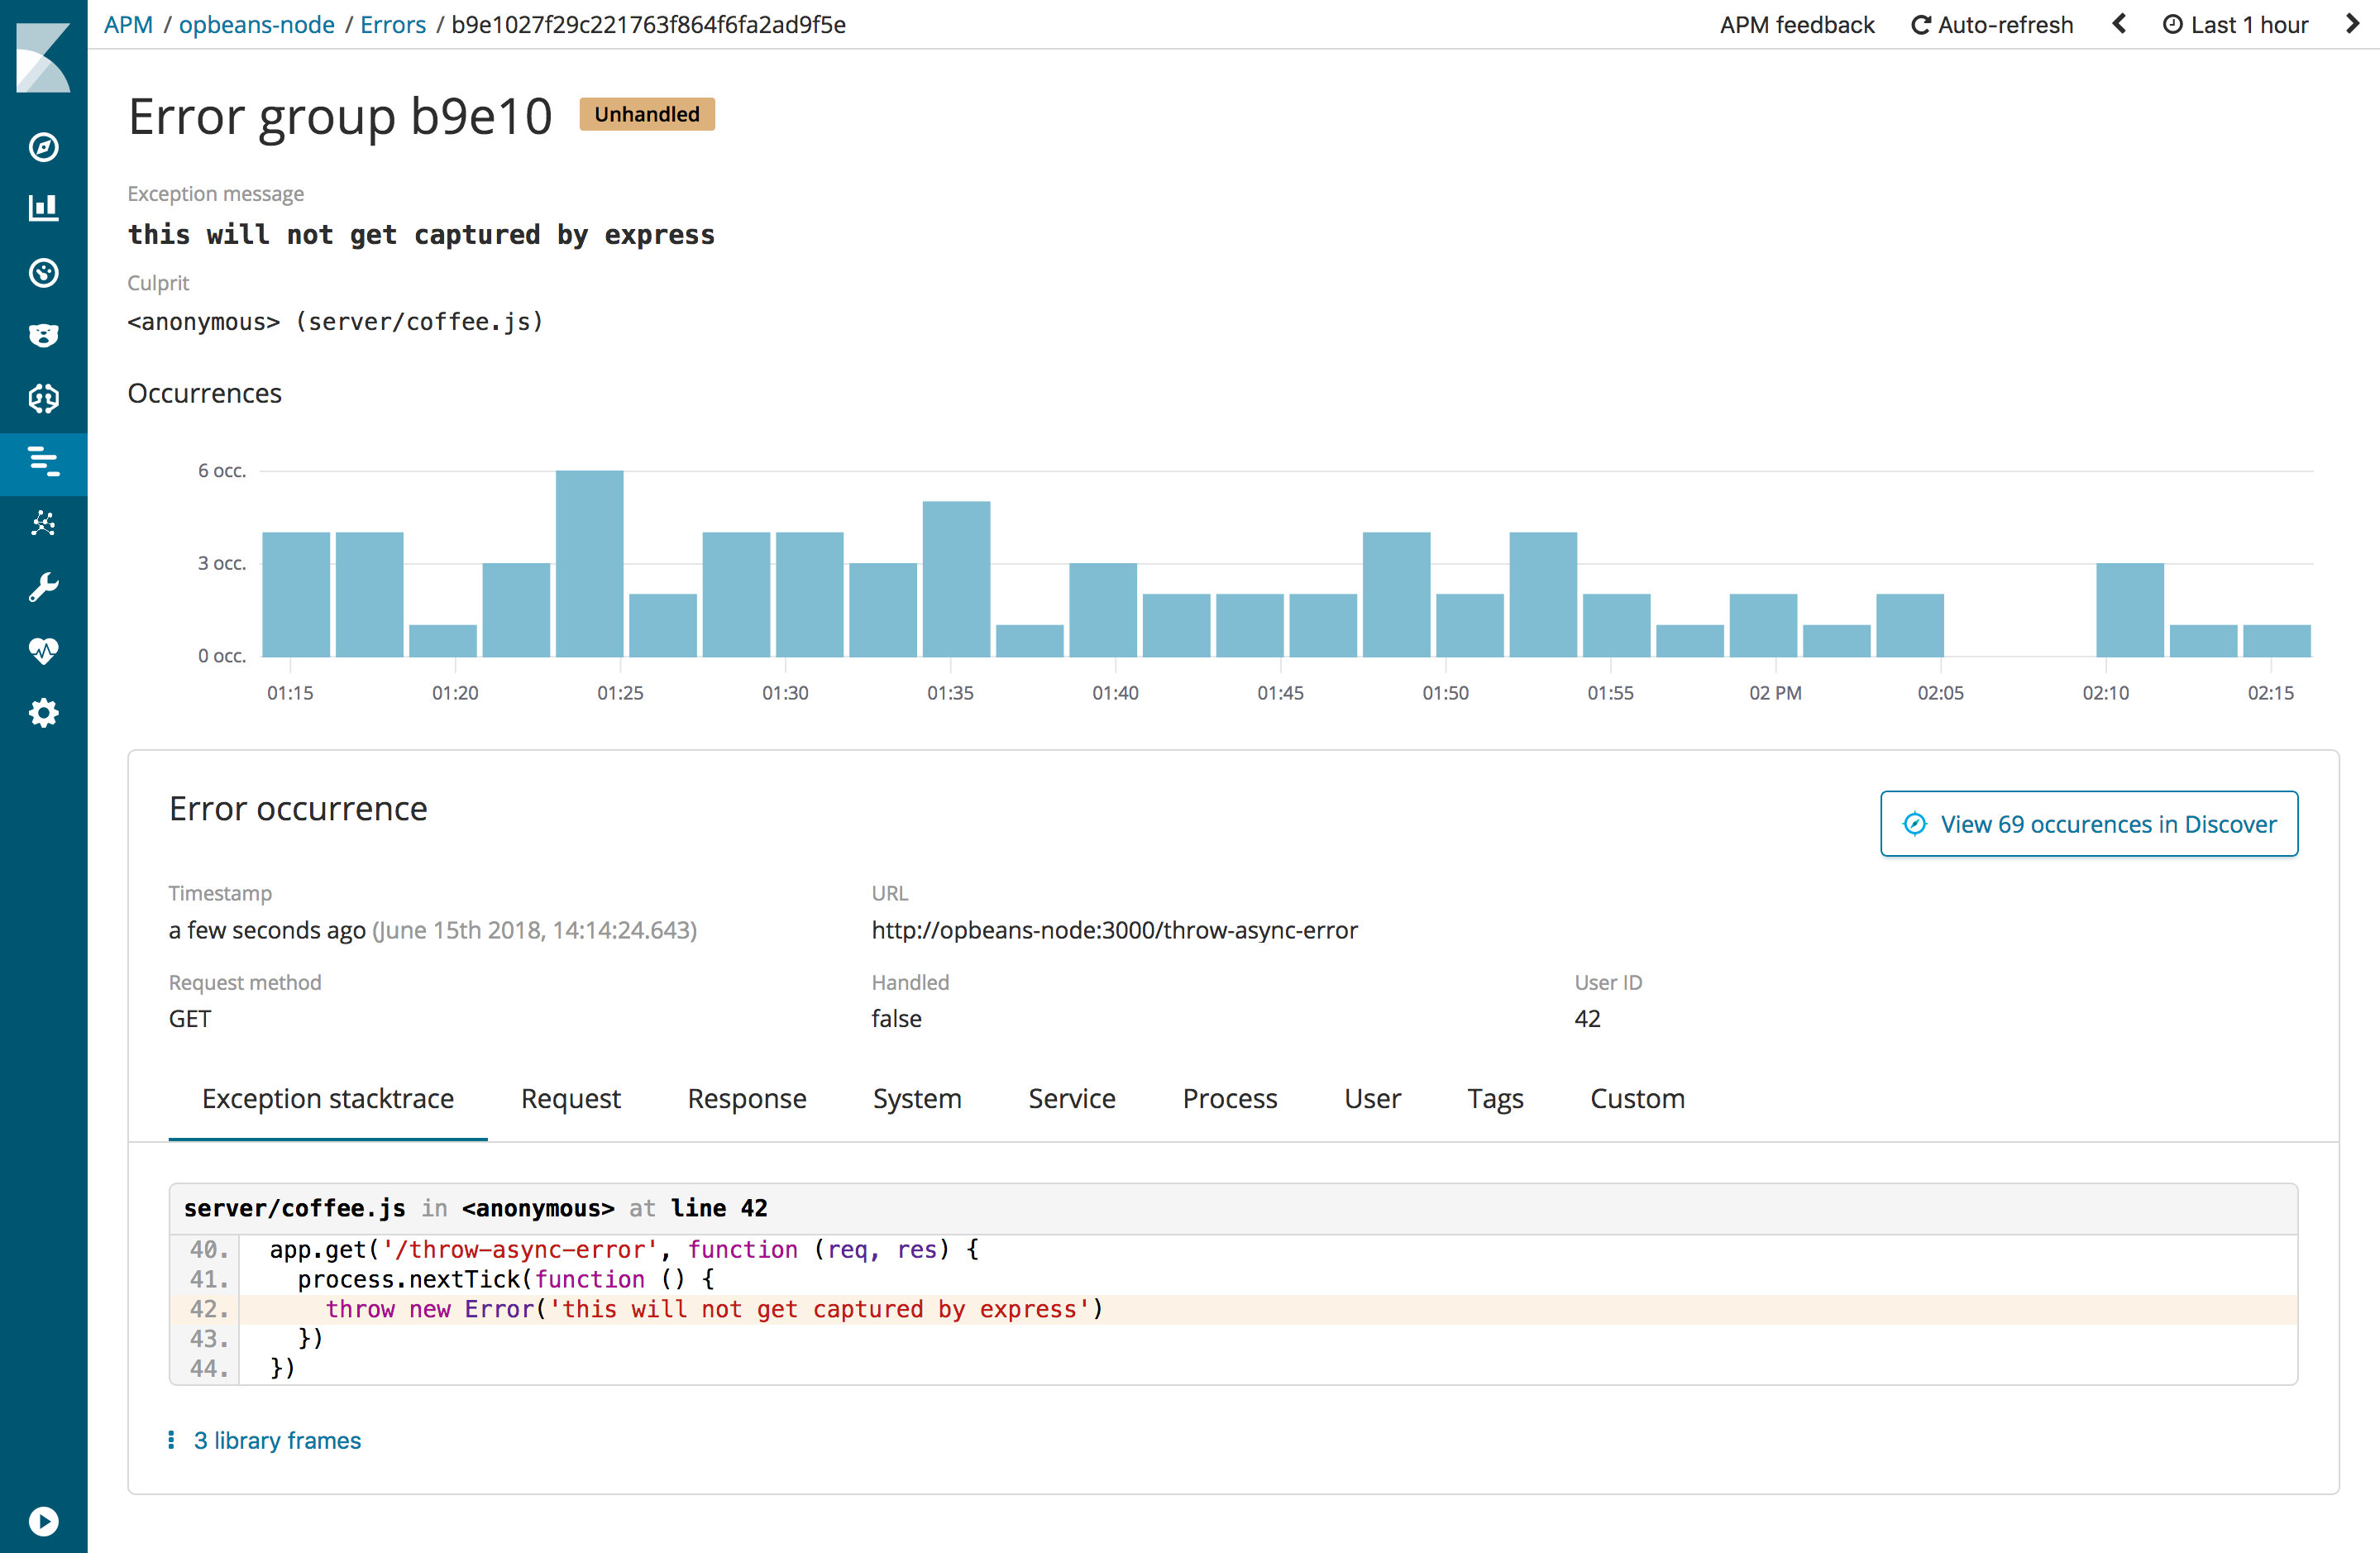 Example view of the error group page in the APM UI in Kibana